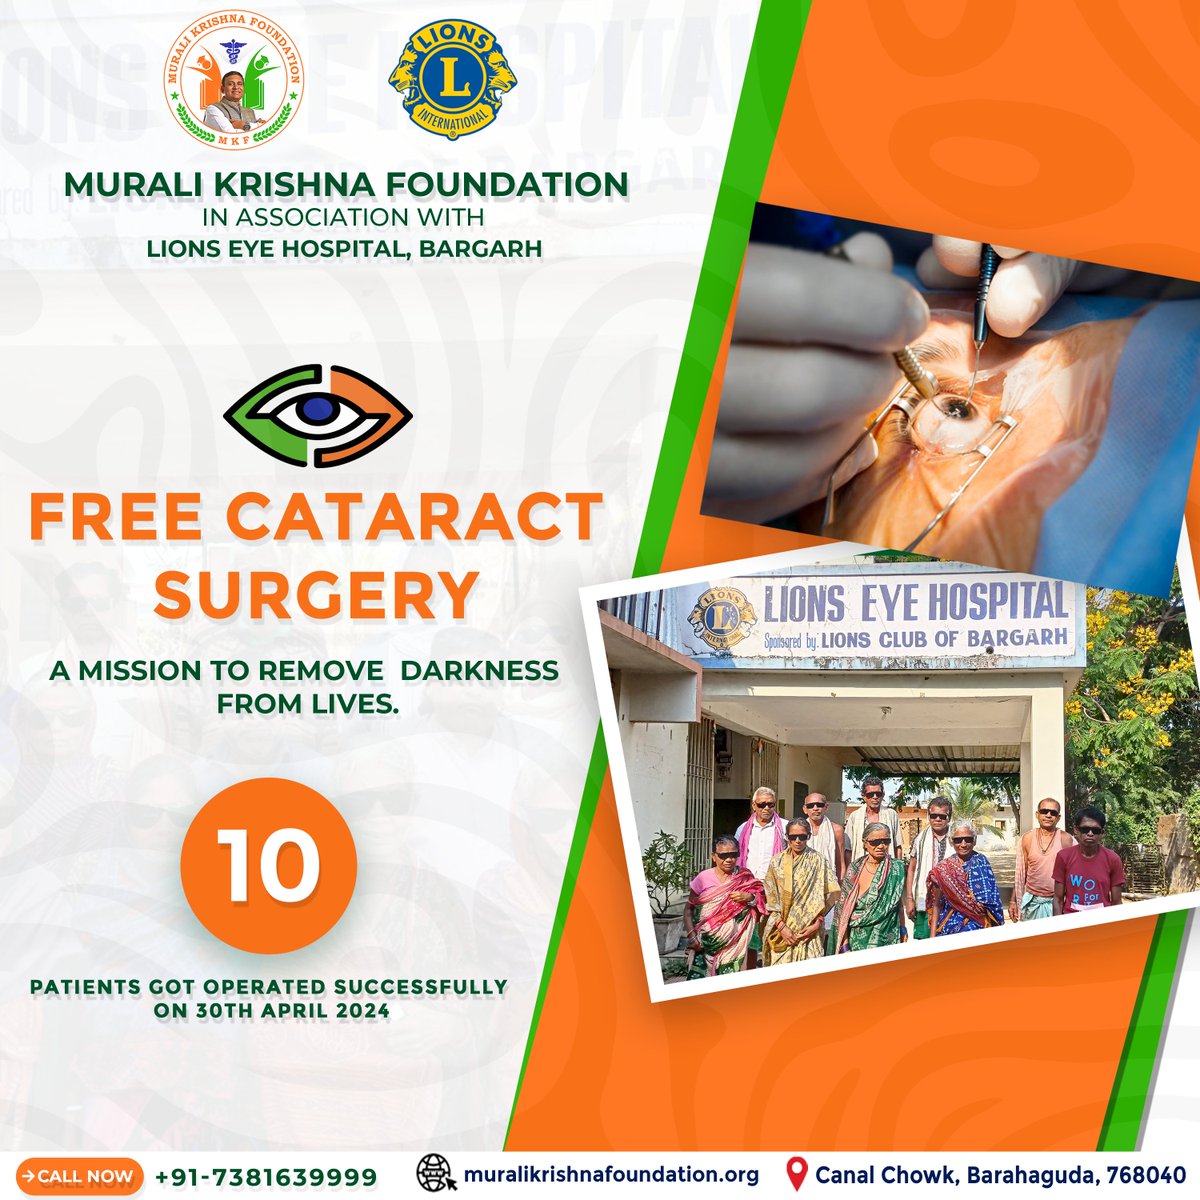 Focusing on brighter tomorrows!

#muralikrishnafoundation #mkf #dmuralikrishna #MKFoundation #Bargarh #Odisha #healthcamp #freehealthcamp #eye #cataract #cataractsurgery